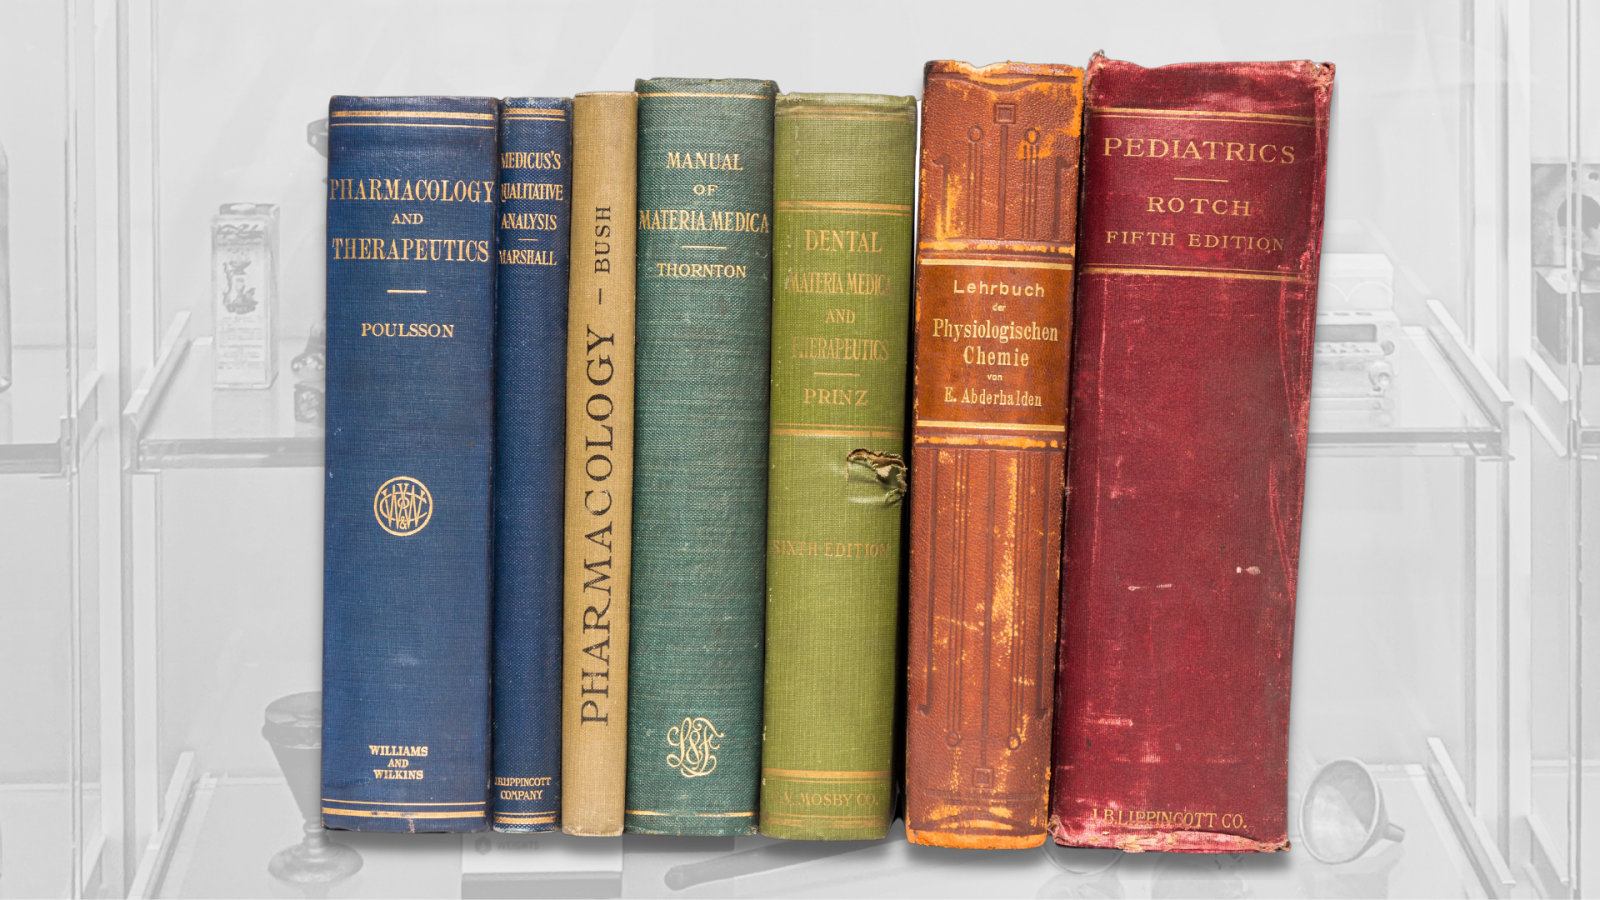 Old pharmacy books from the VCU School of Pharmacy Heritage Trail